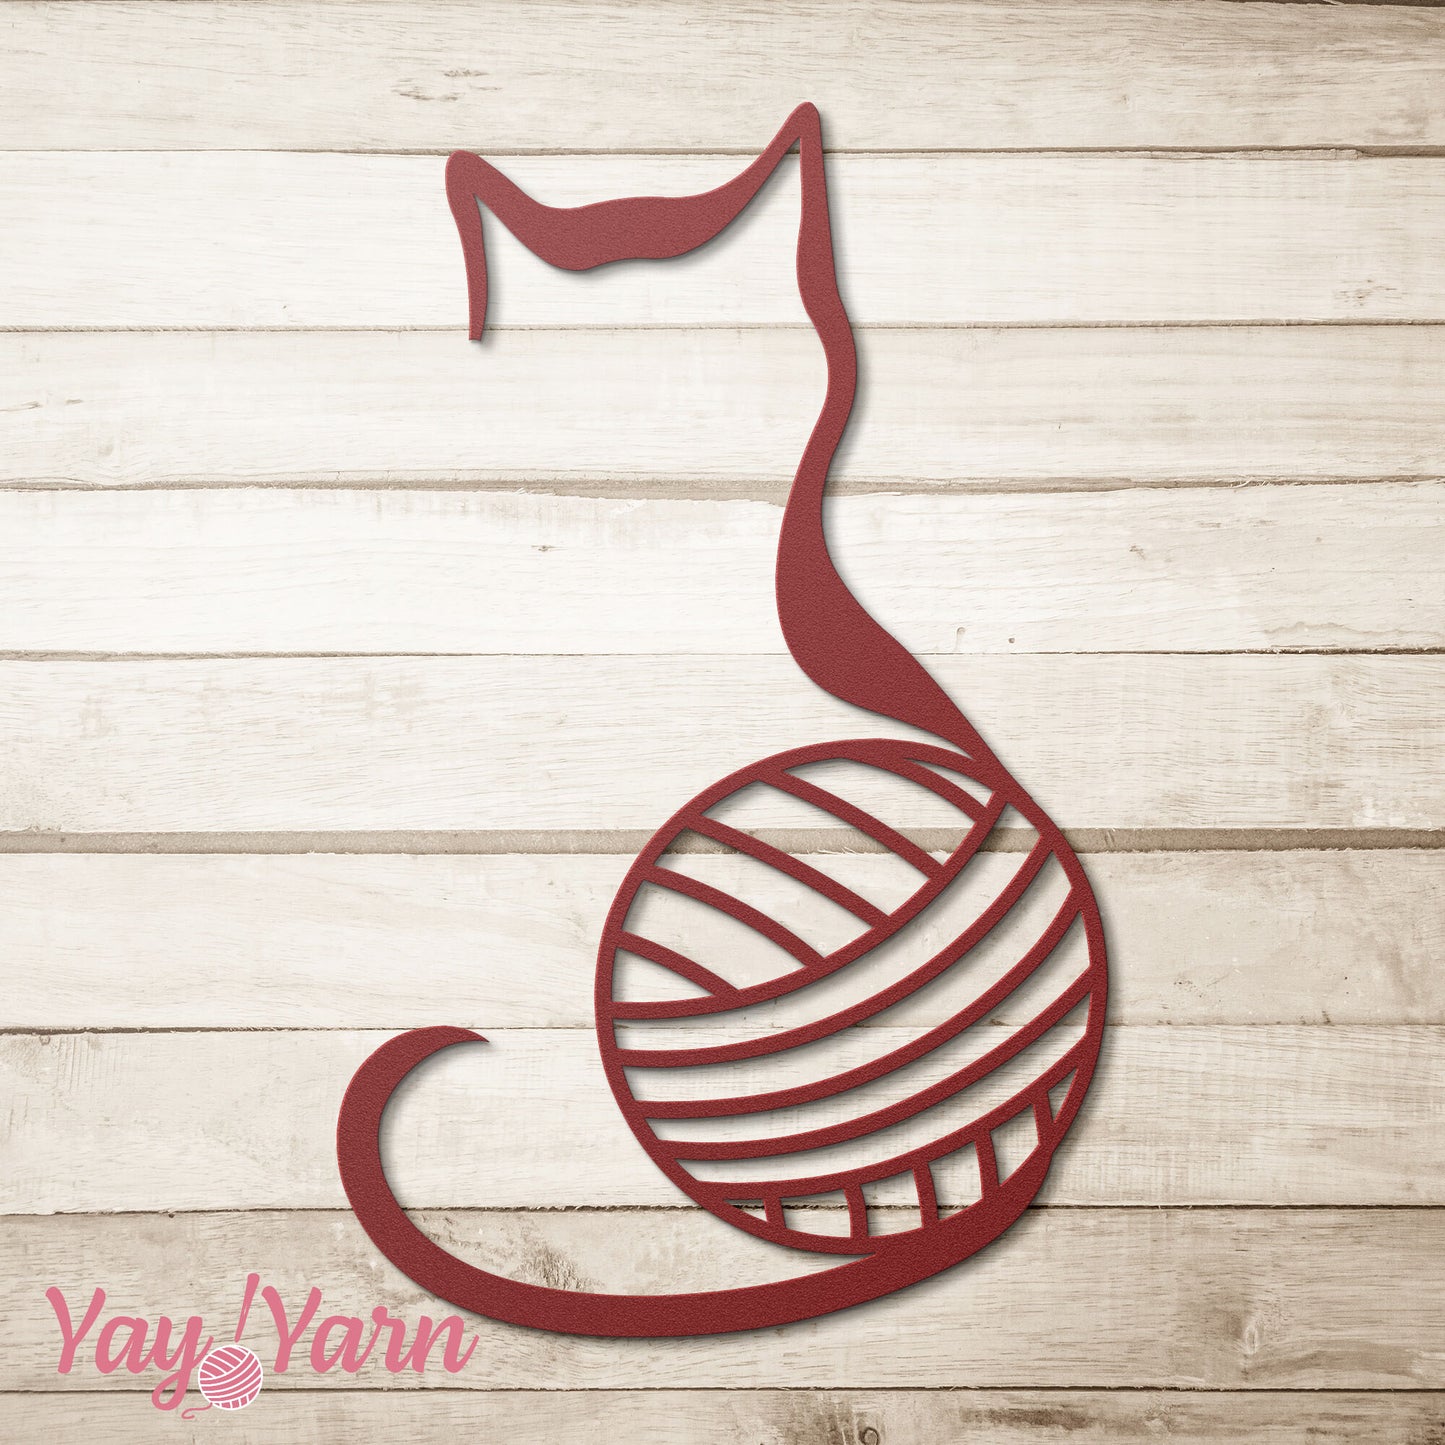 Yarn Cat Metal Wall Art Red on Natural Wood Background